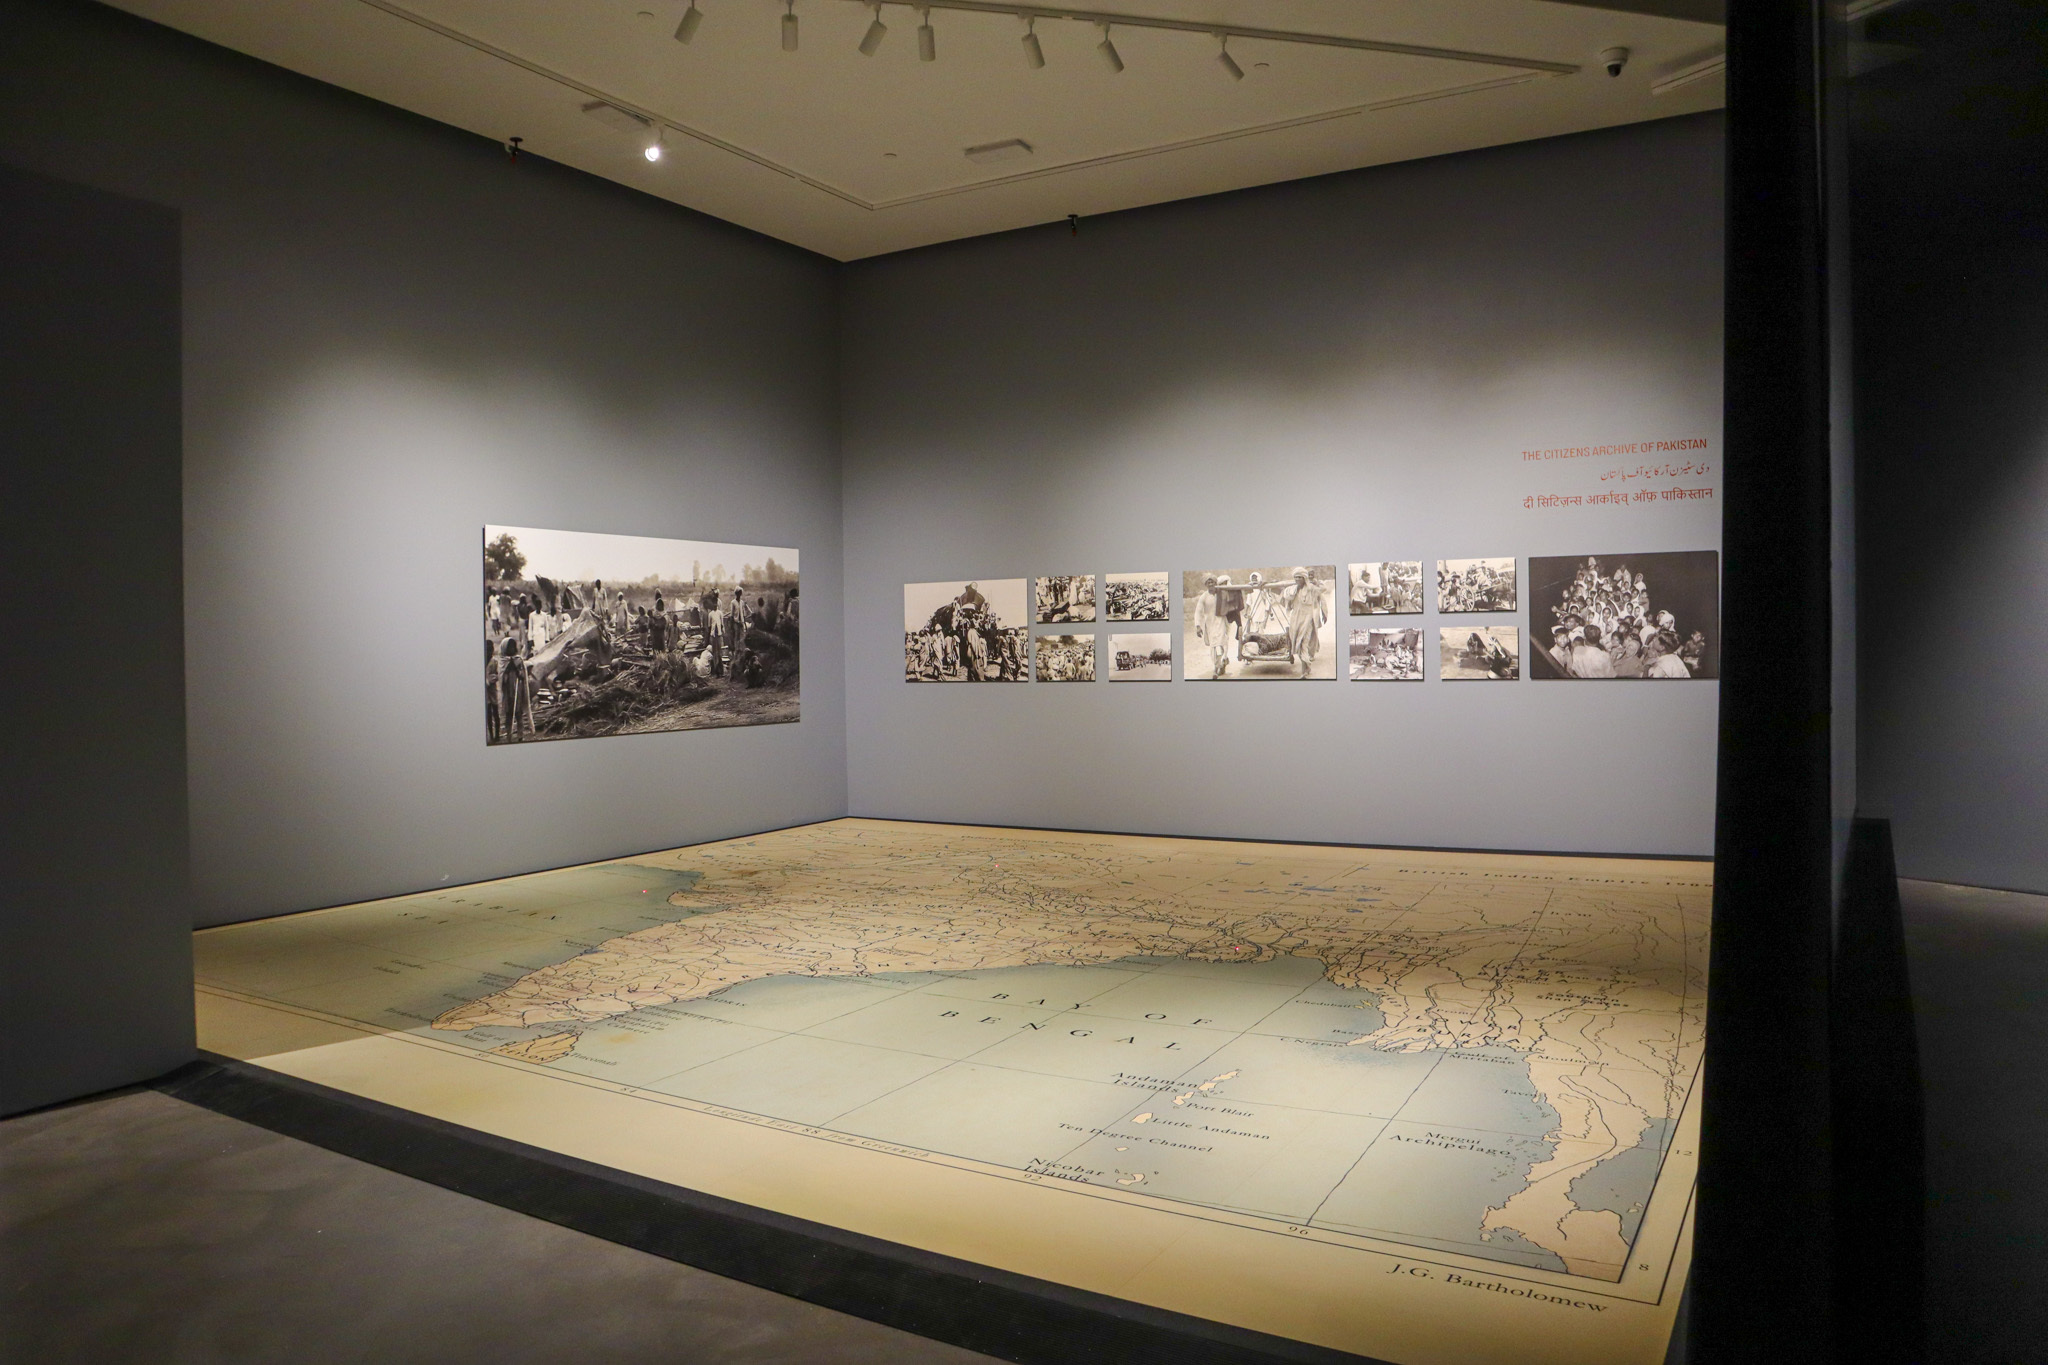 An art gallery with a large interactive map on the ground, and black-and-white rectangular photos lining the wall